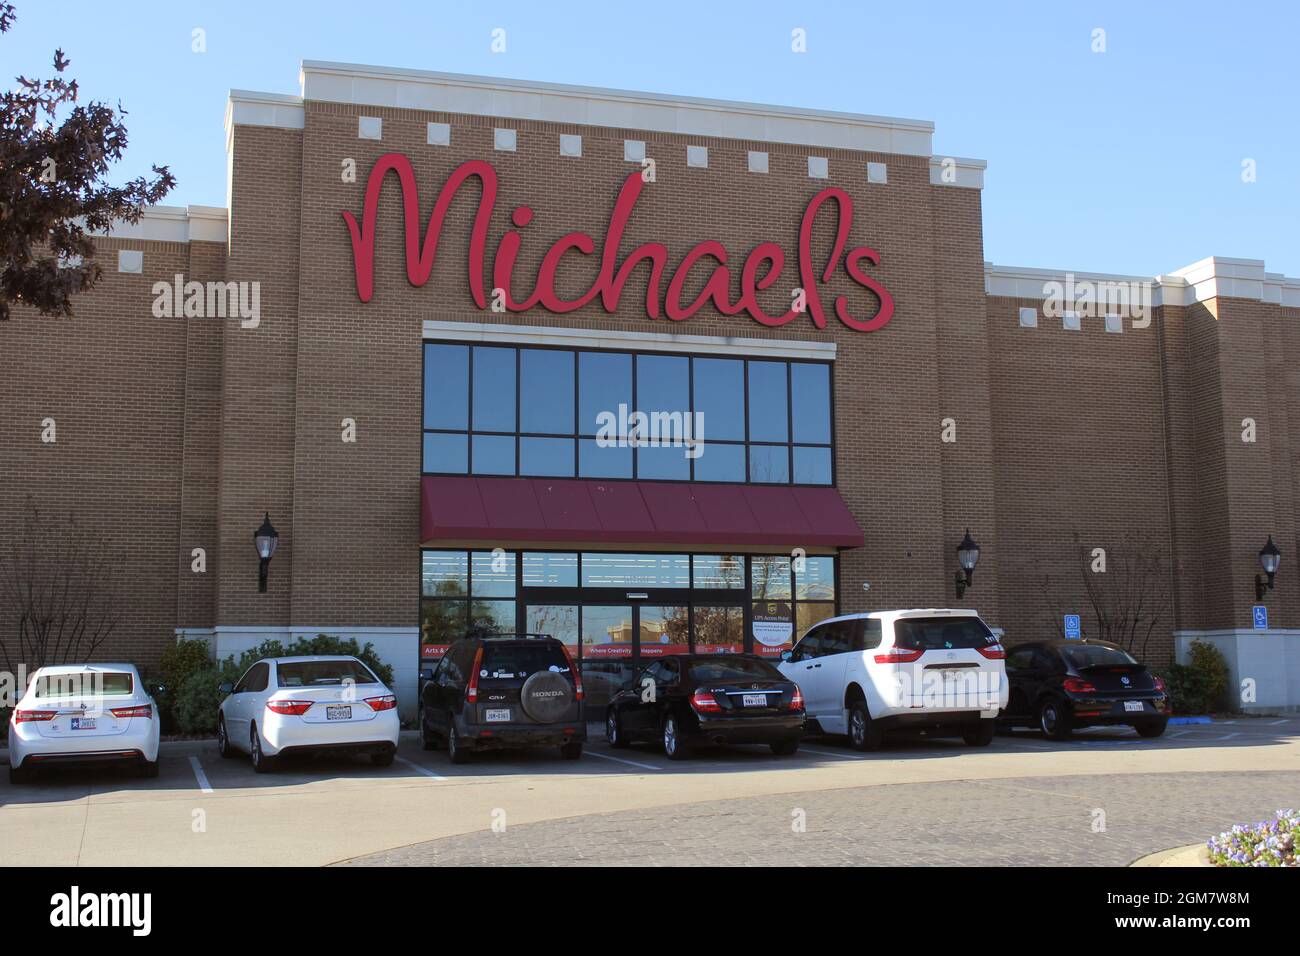 52 Michaels Craft Store Locations Stock Photos and High-res Pictures